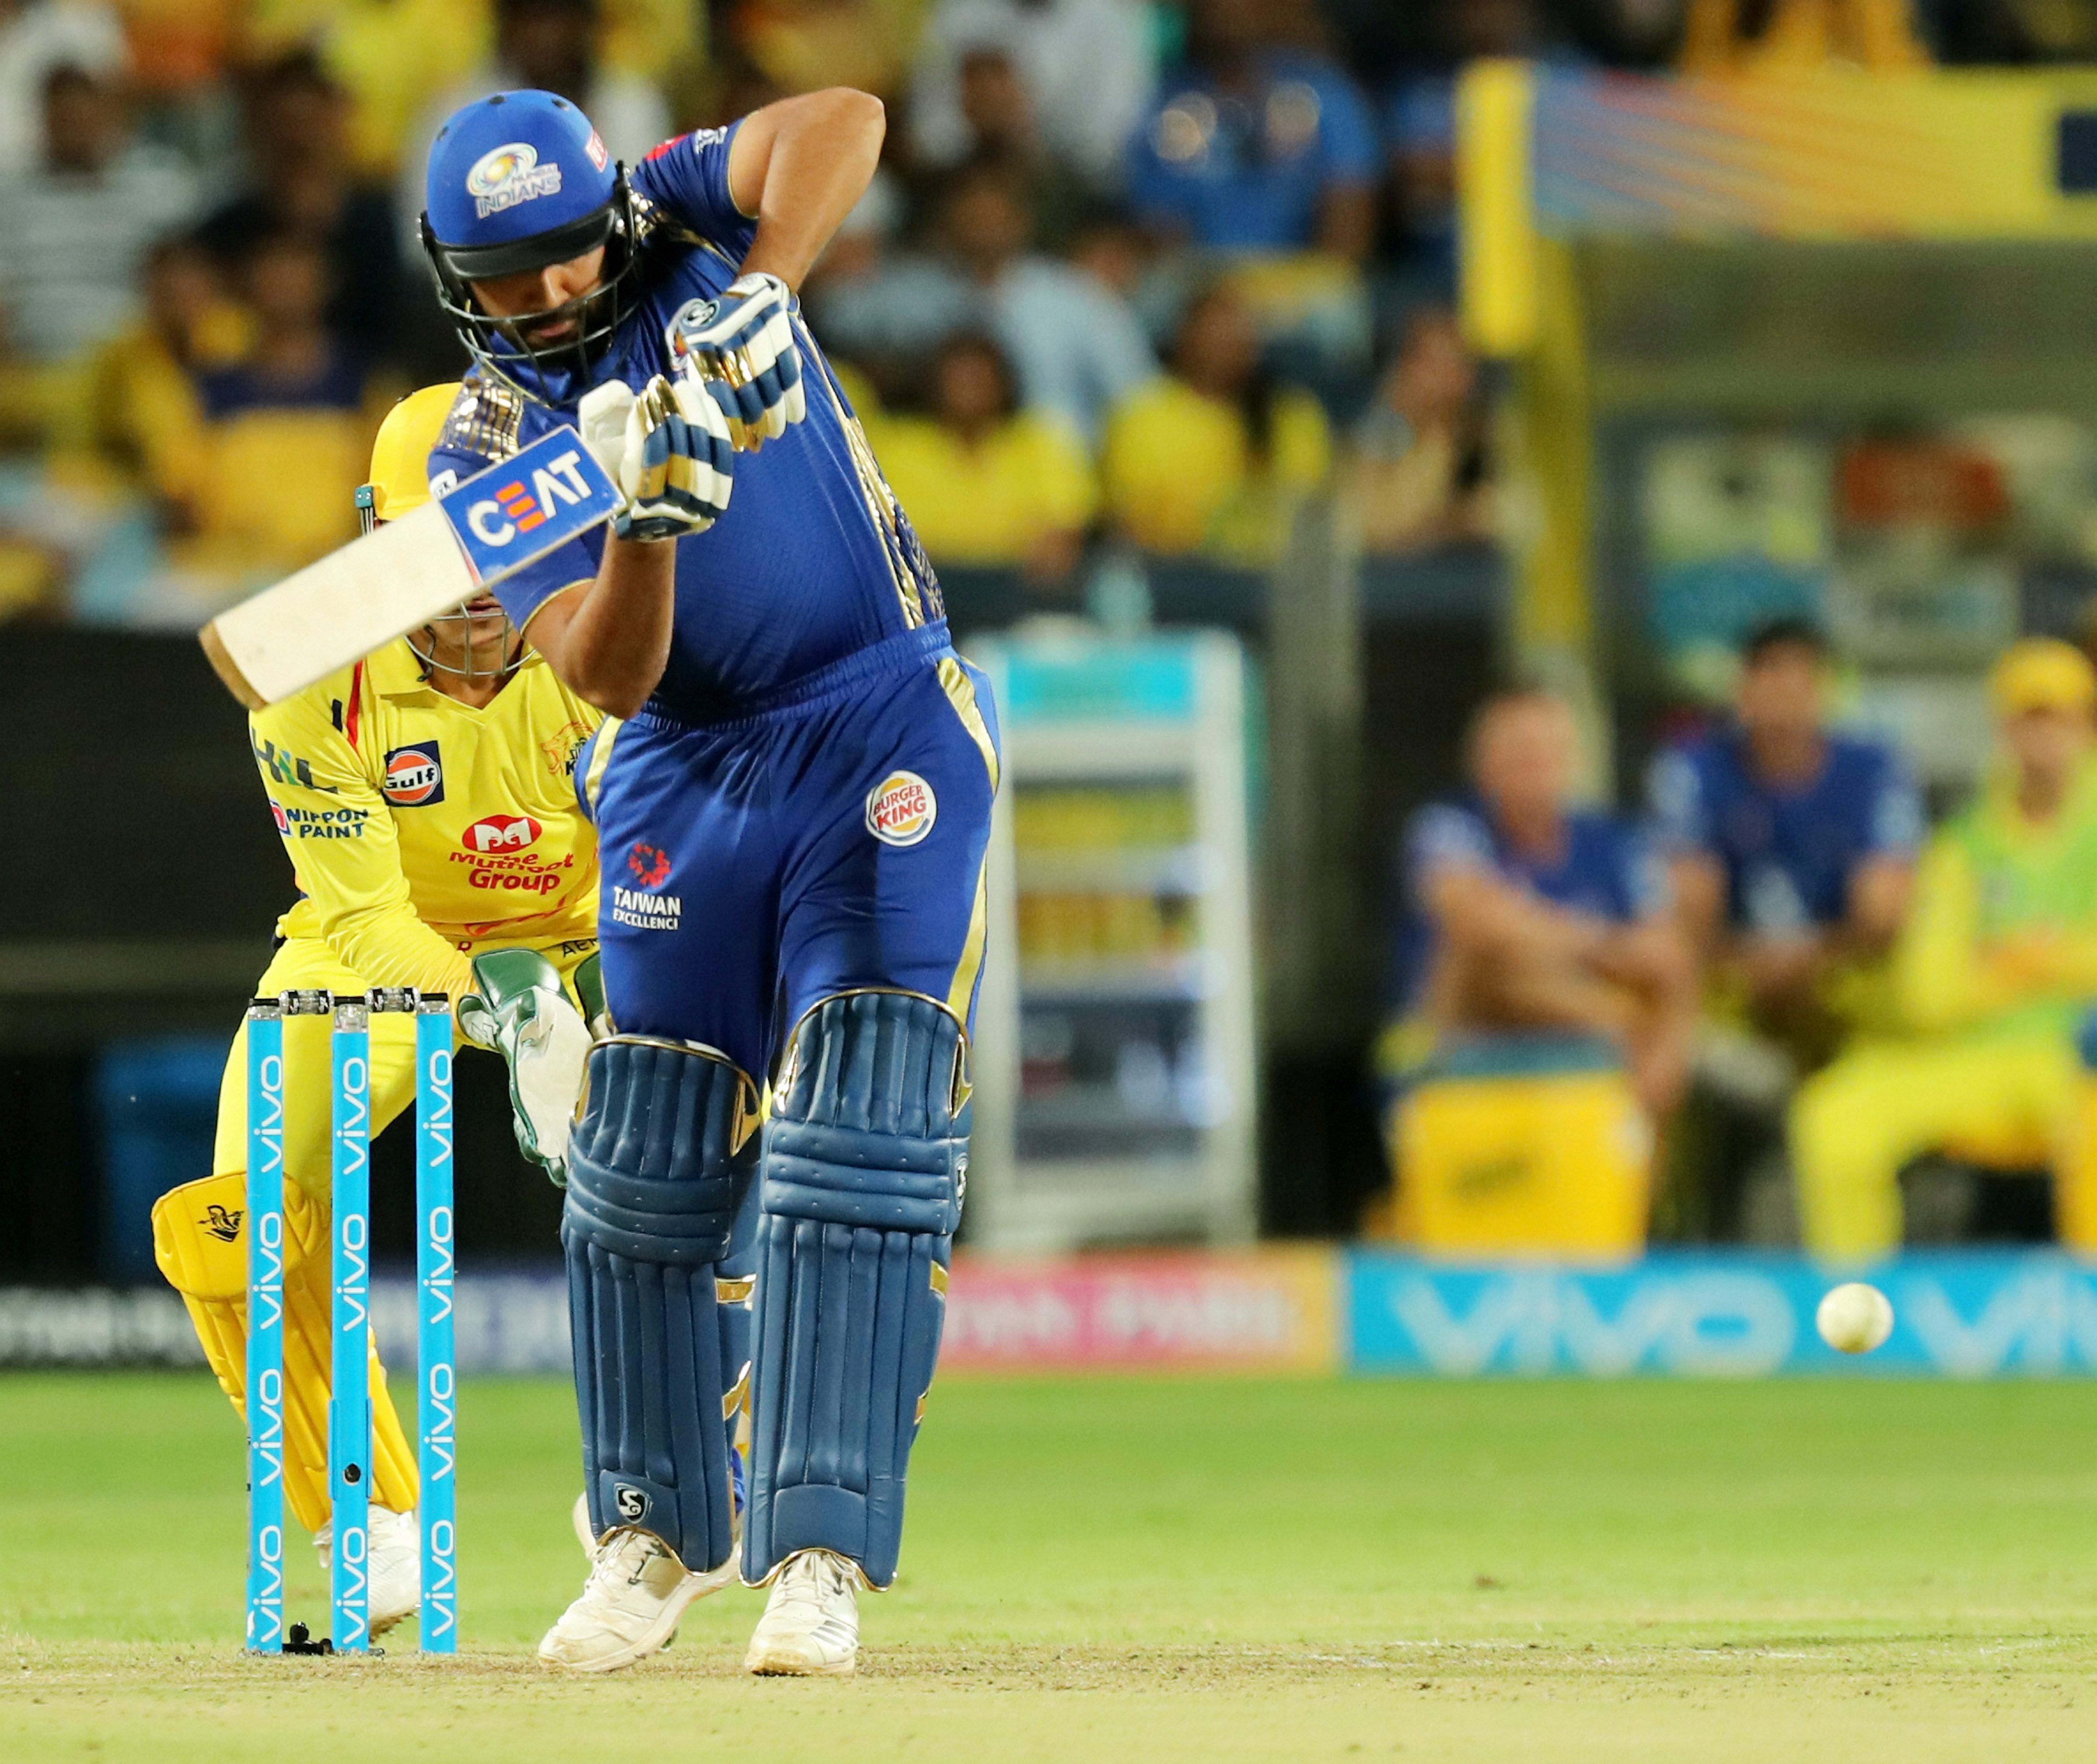 Skipper Rohit Sharma hit an unbeaten 56 to power Mumbai Indians to a much-needed win over Chennai Super Kings on Saturday. PTI